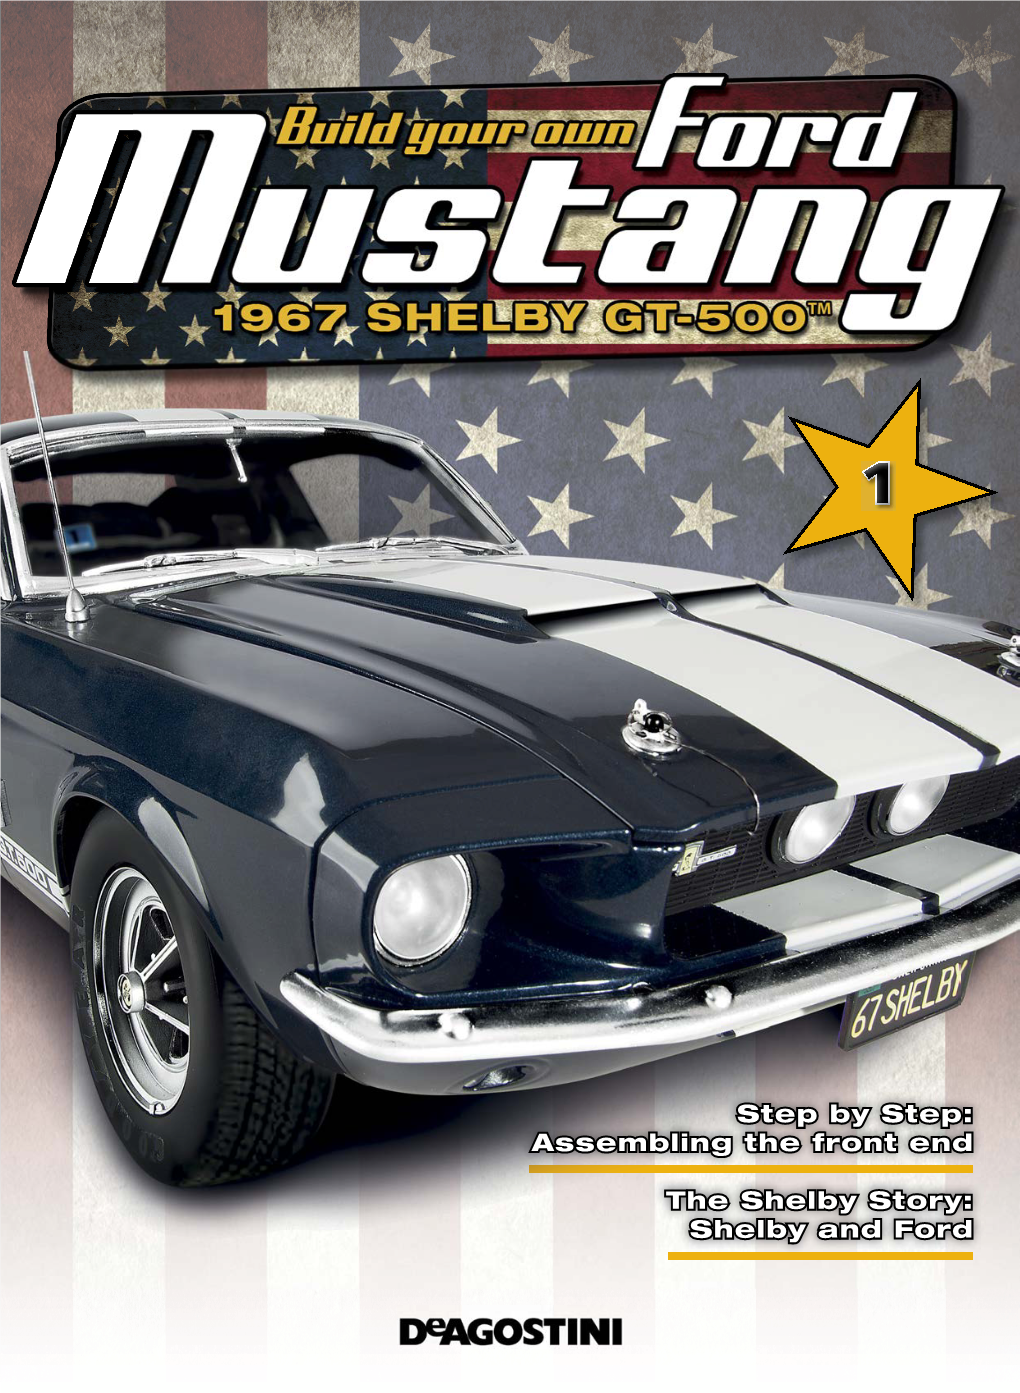 Build the Shelby Mustang GT